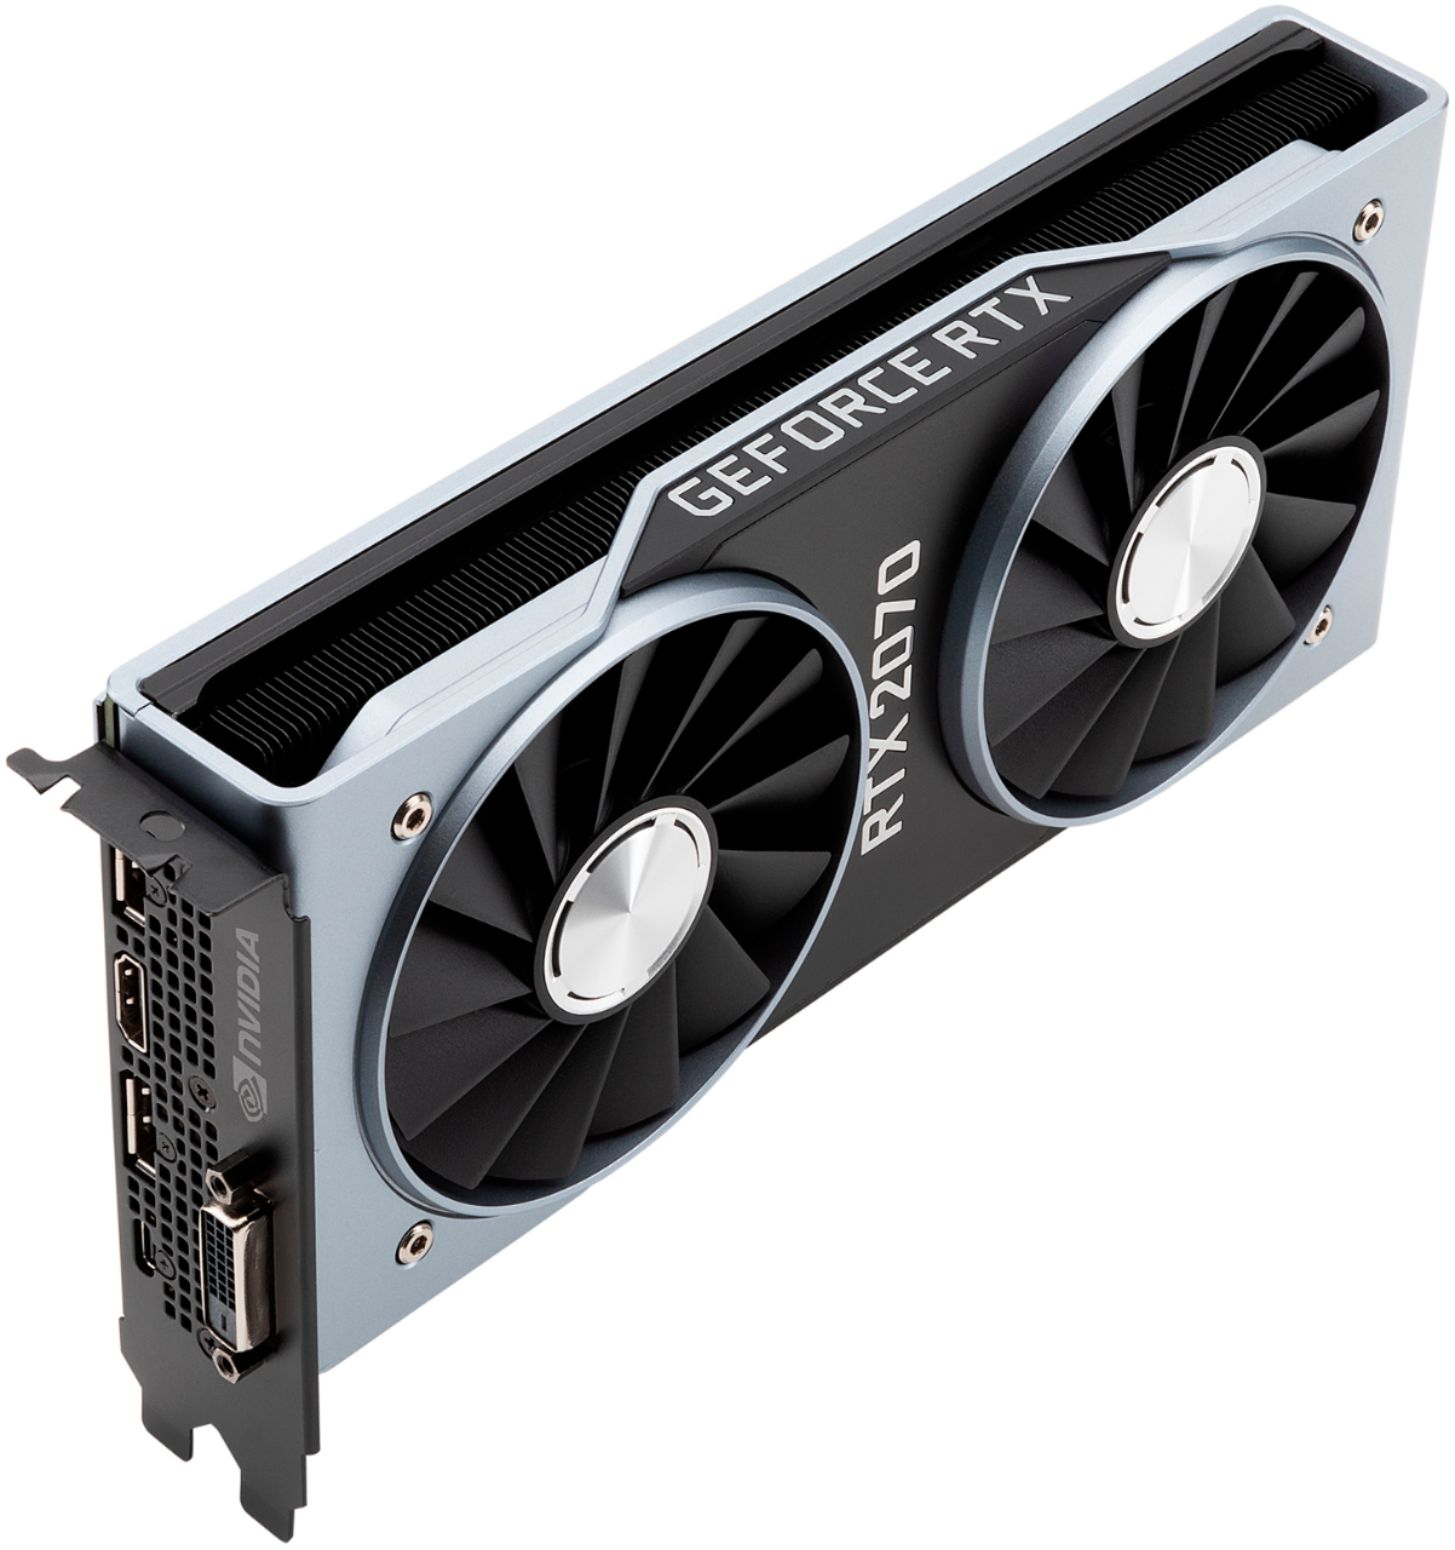 Buy: GeForce RTX 2070 Founders Edition 8GB GDDR6 PCI Express 3.1 Graphics Card 9001G1602550000